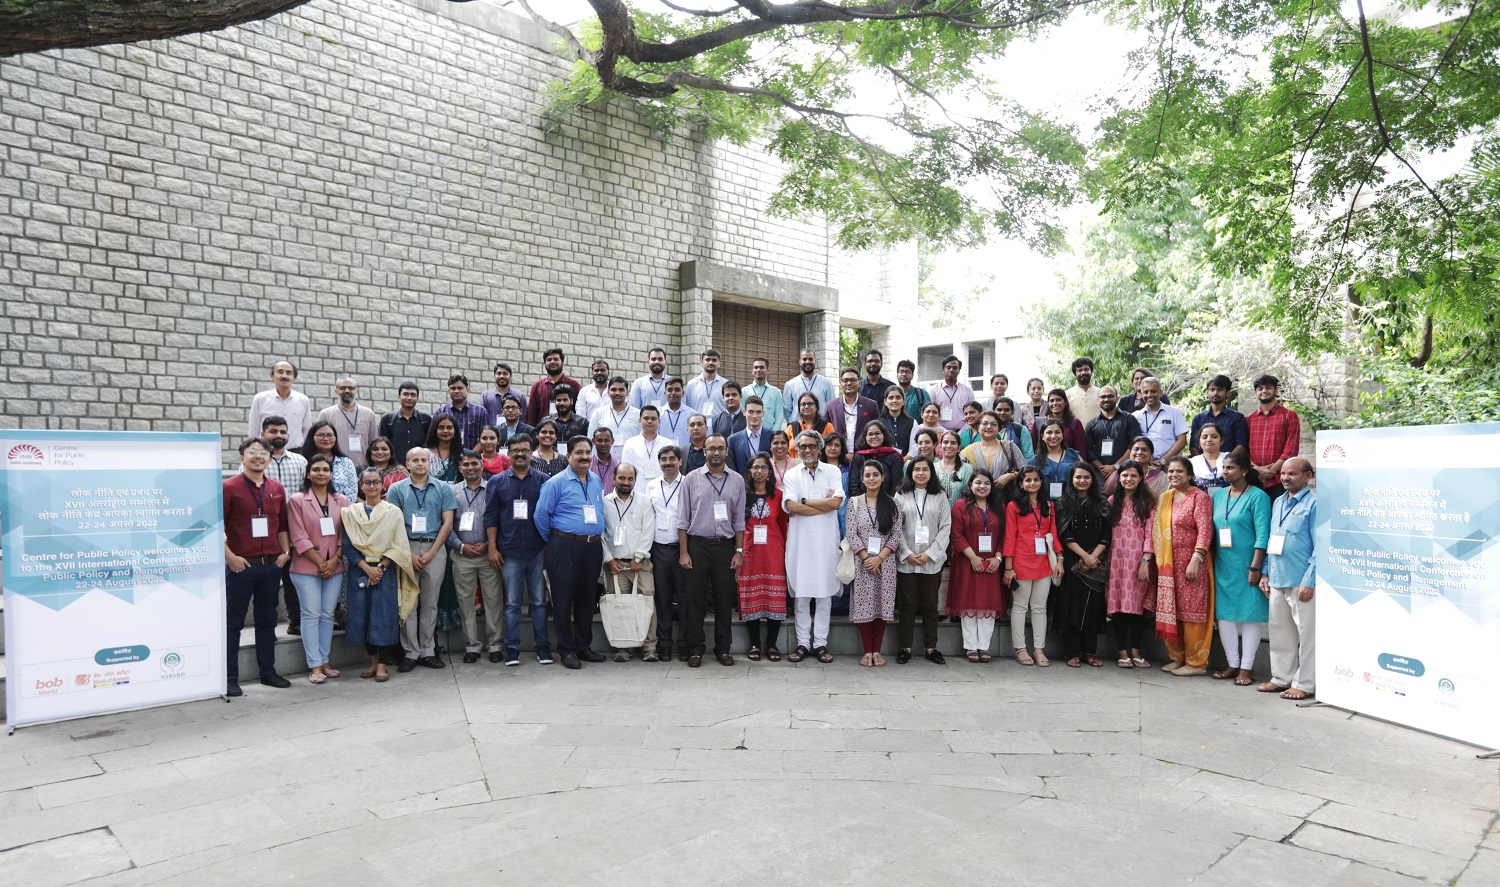 A snapshot of conference organizers and participants.